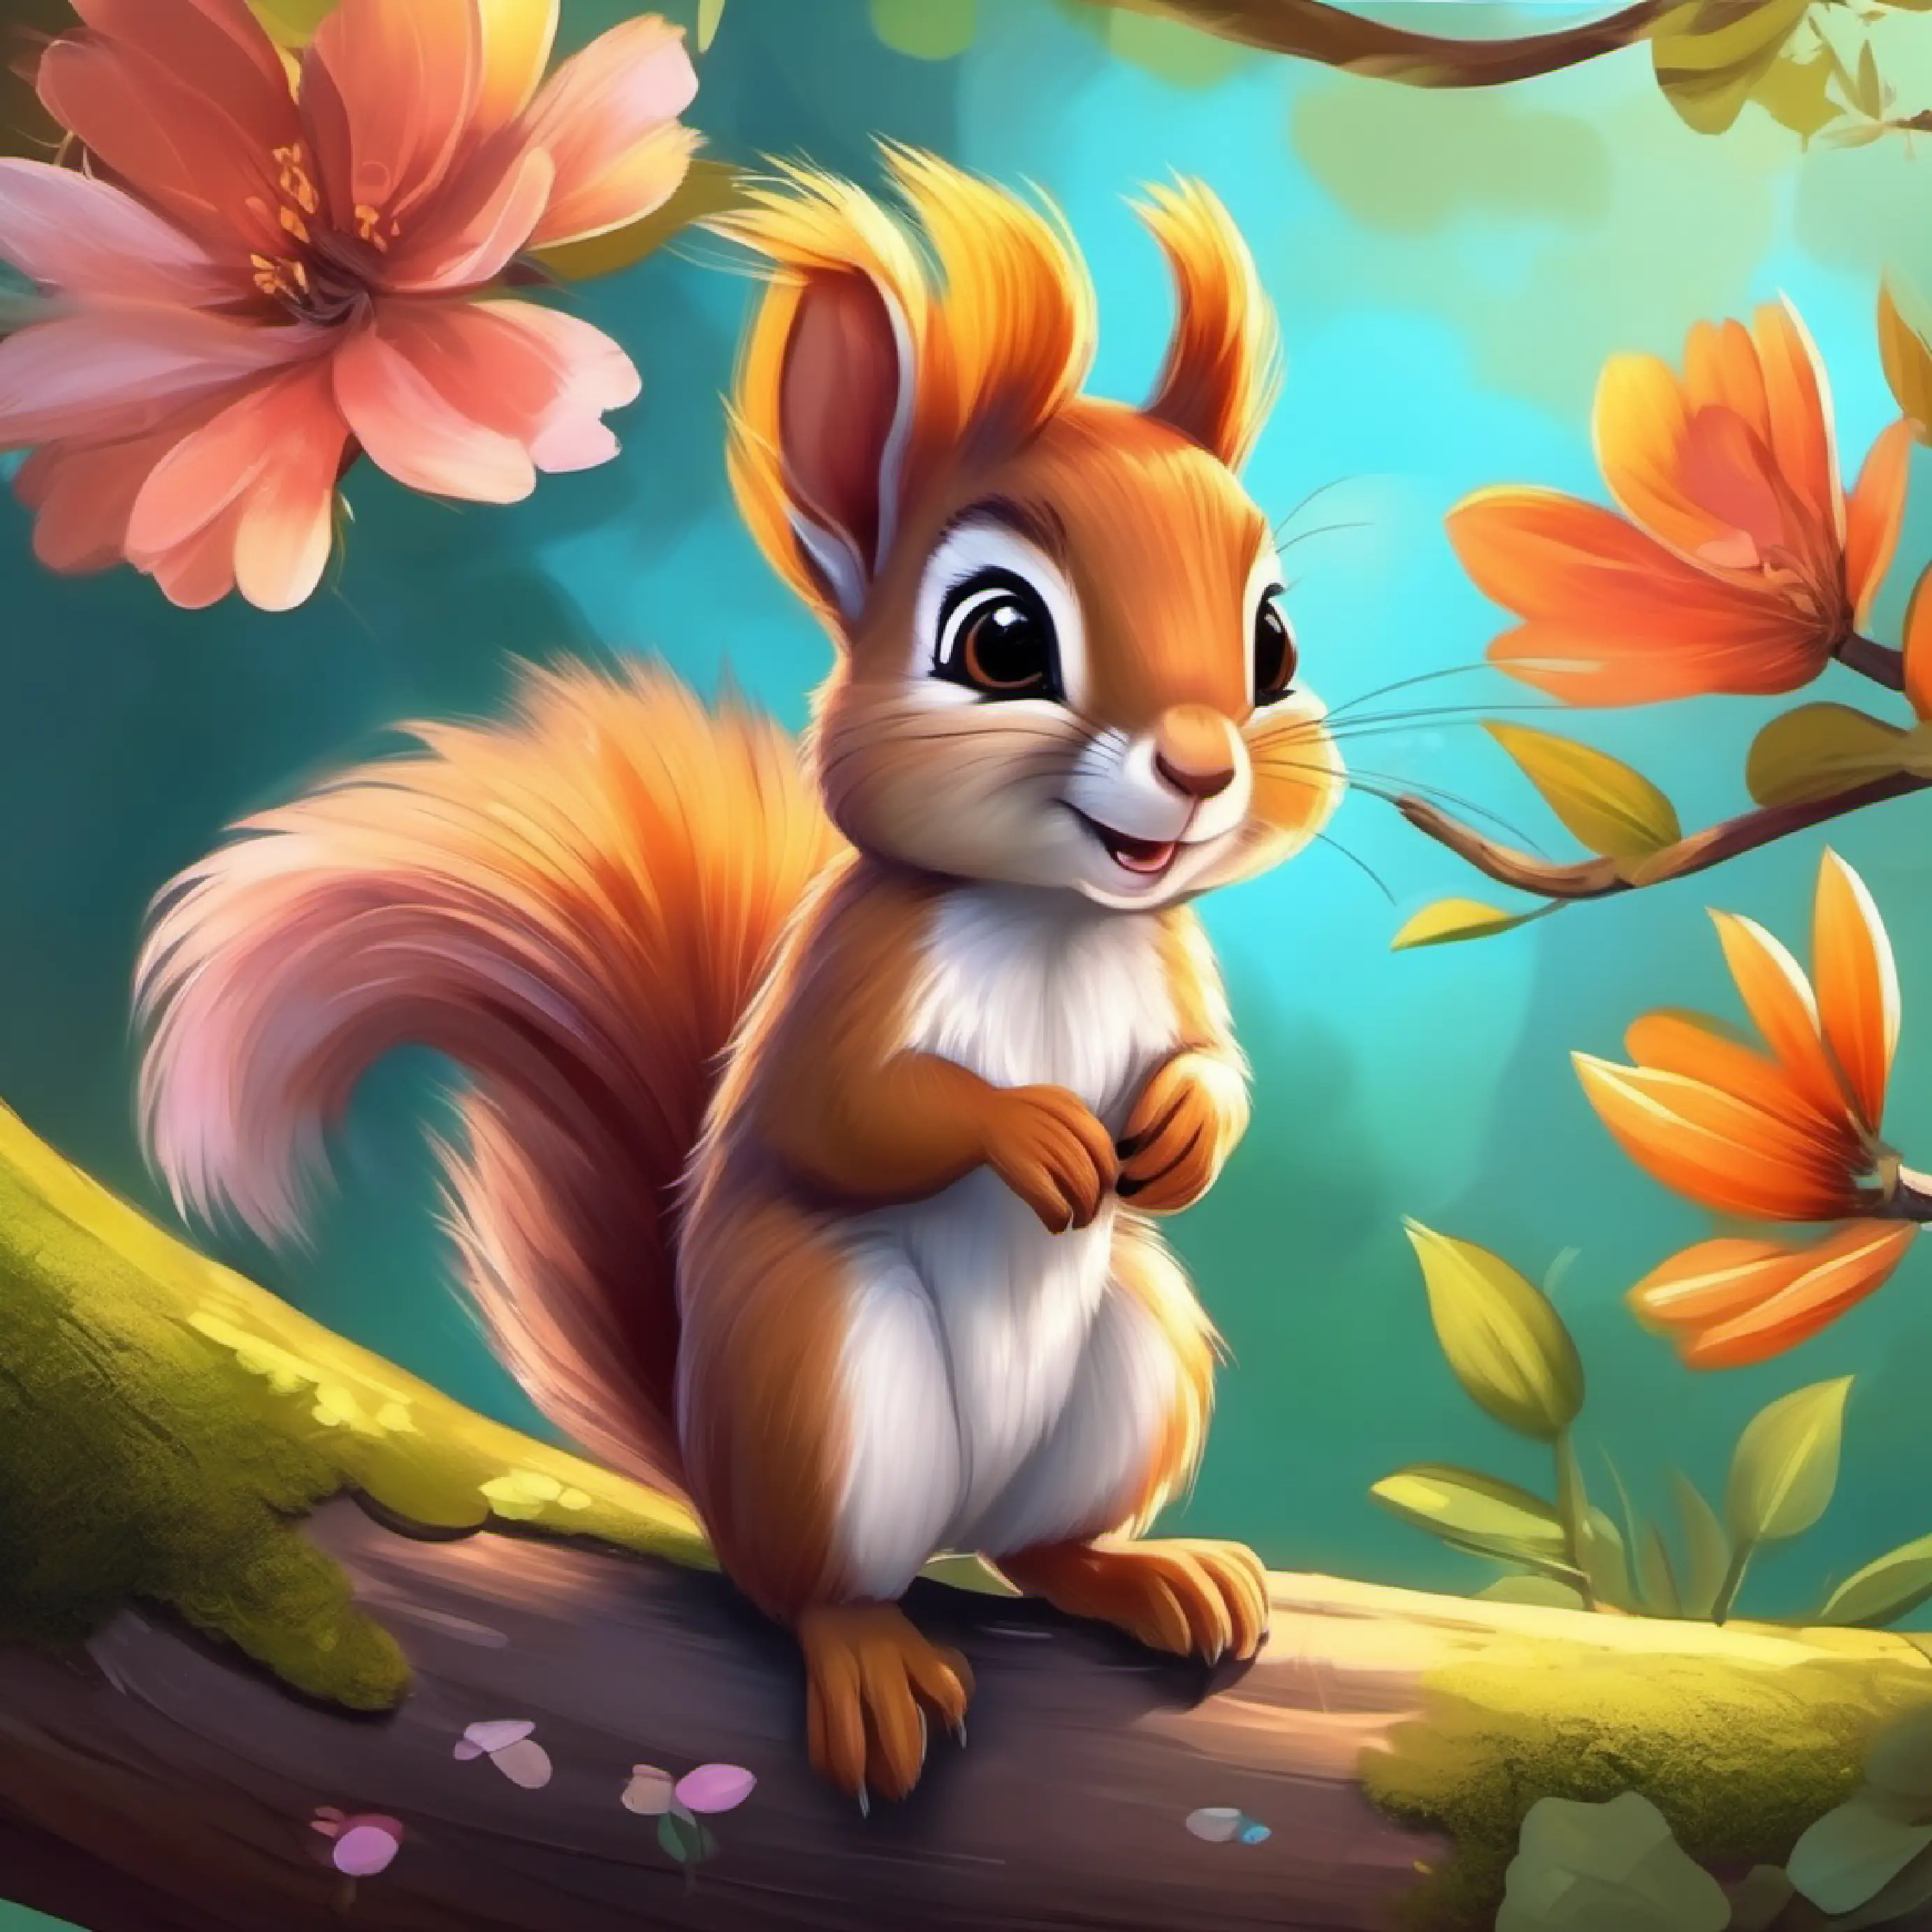 Young, playful squirrel with a bushy tail and bright, curious eyes discovered a beautiful flower blooming on the tree